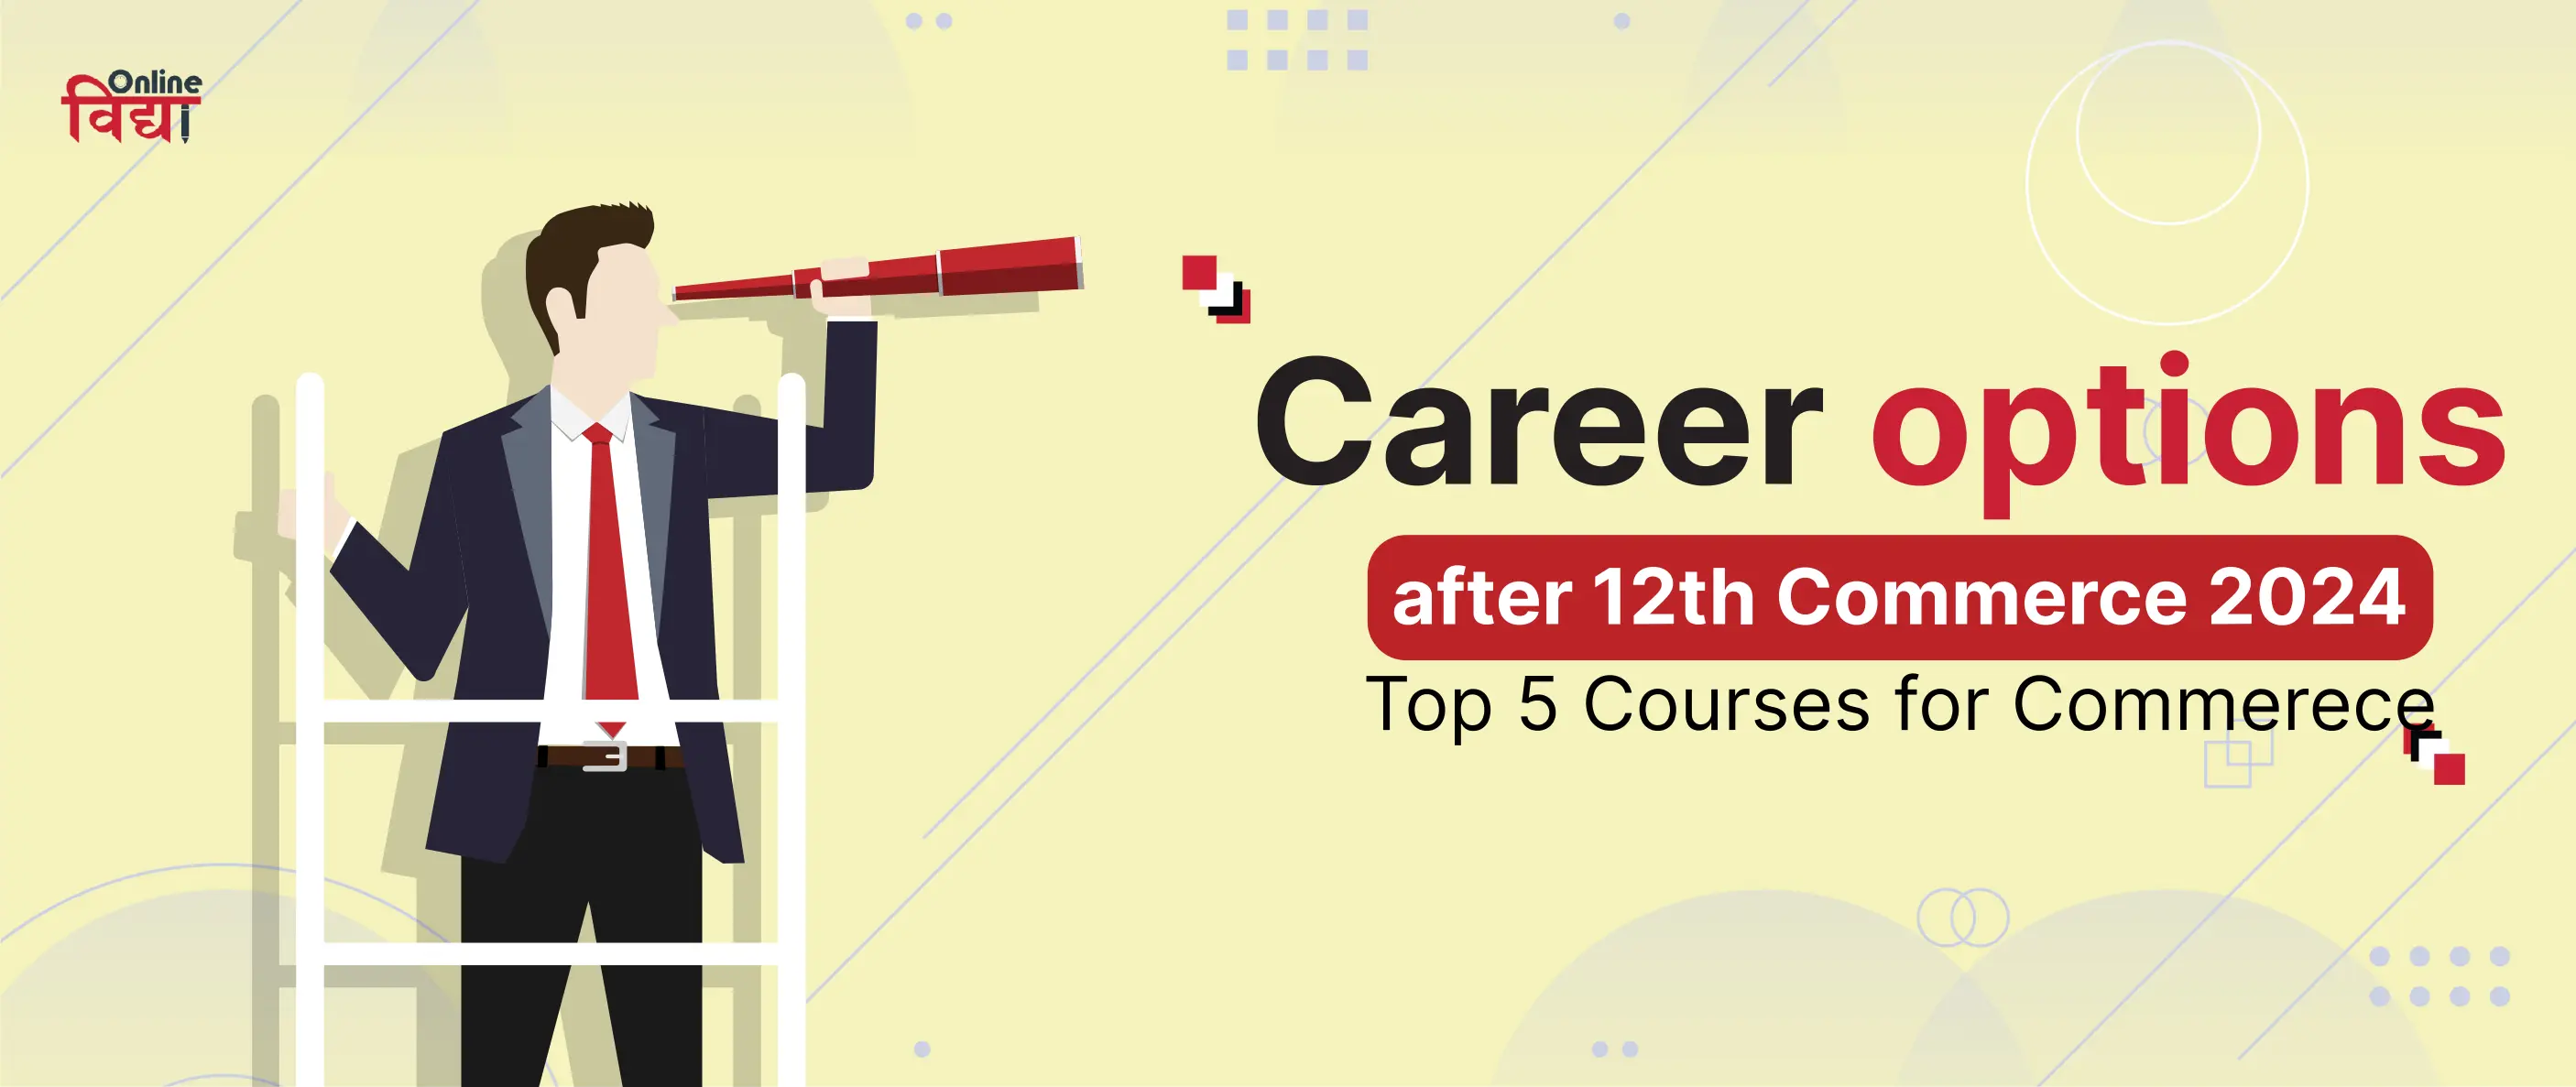 Career options after 12th Commerce 2024- Top 5 Courses for Commerece